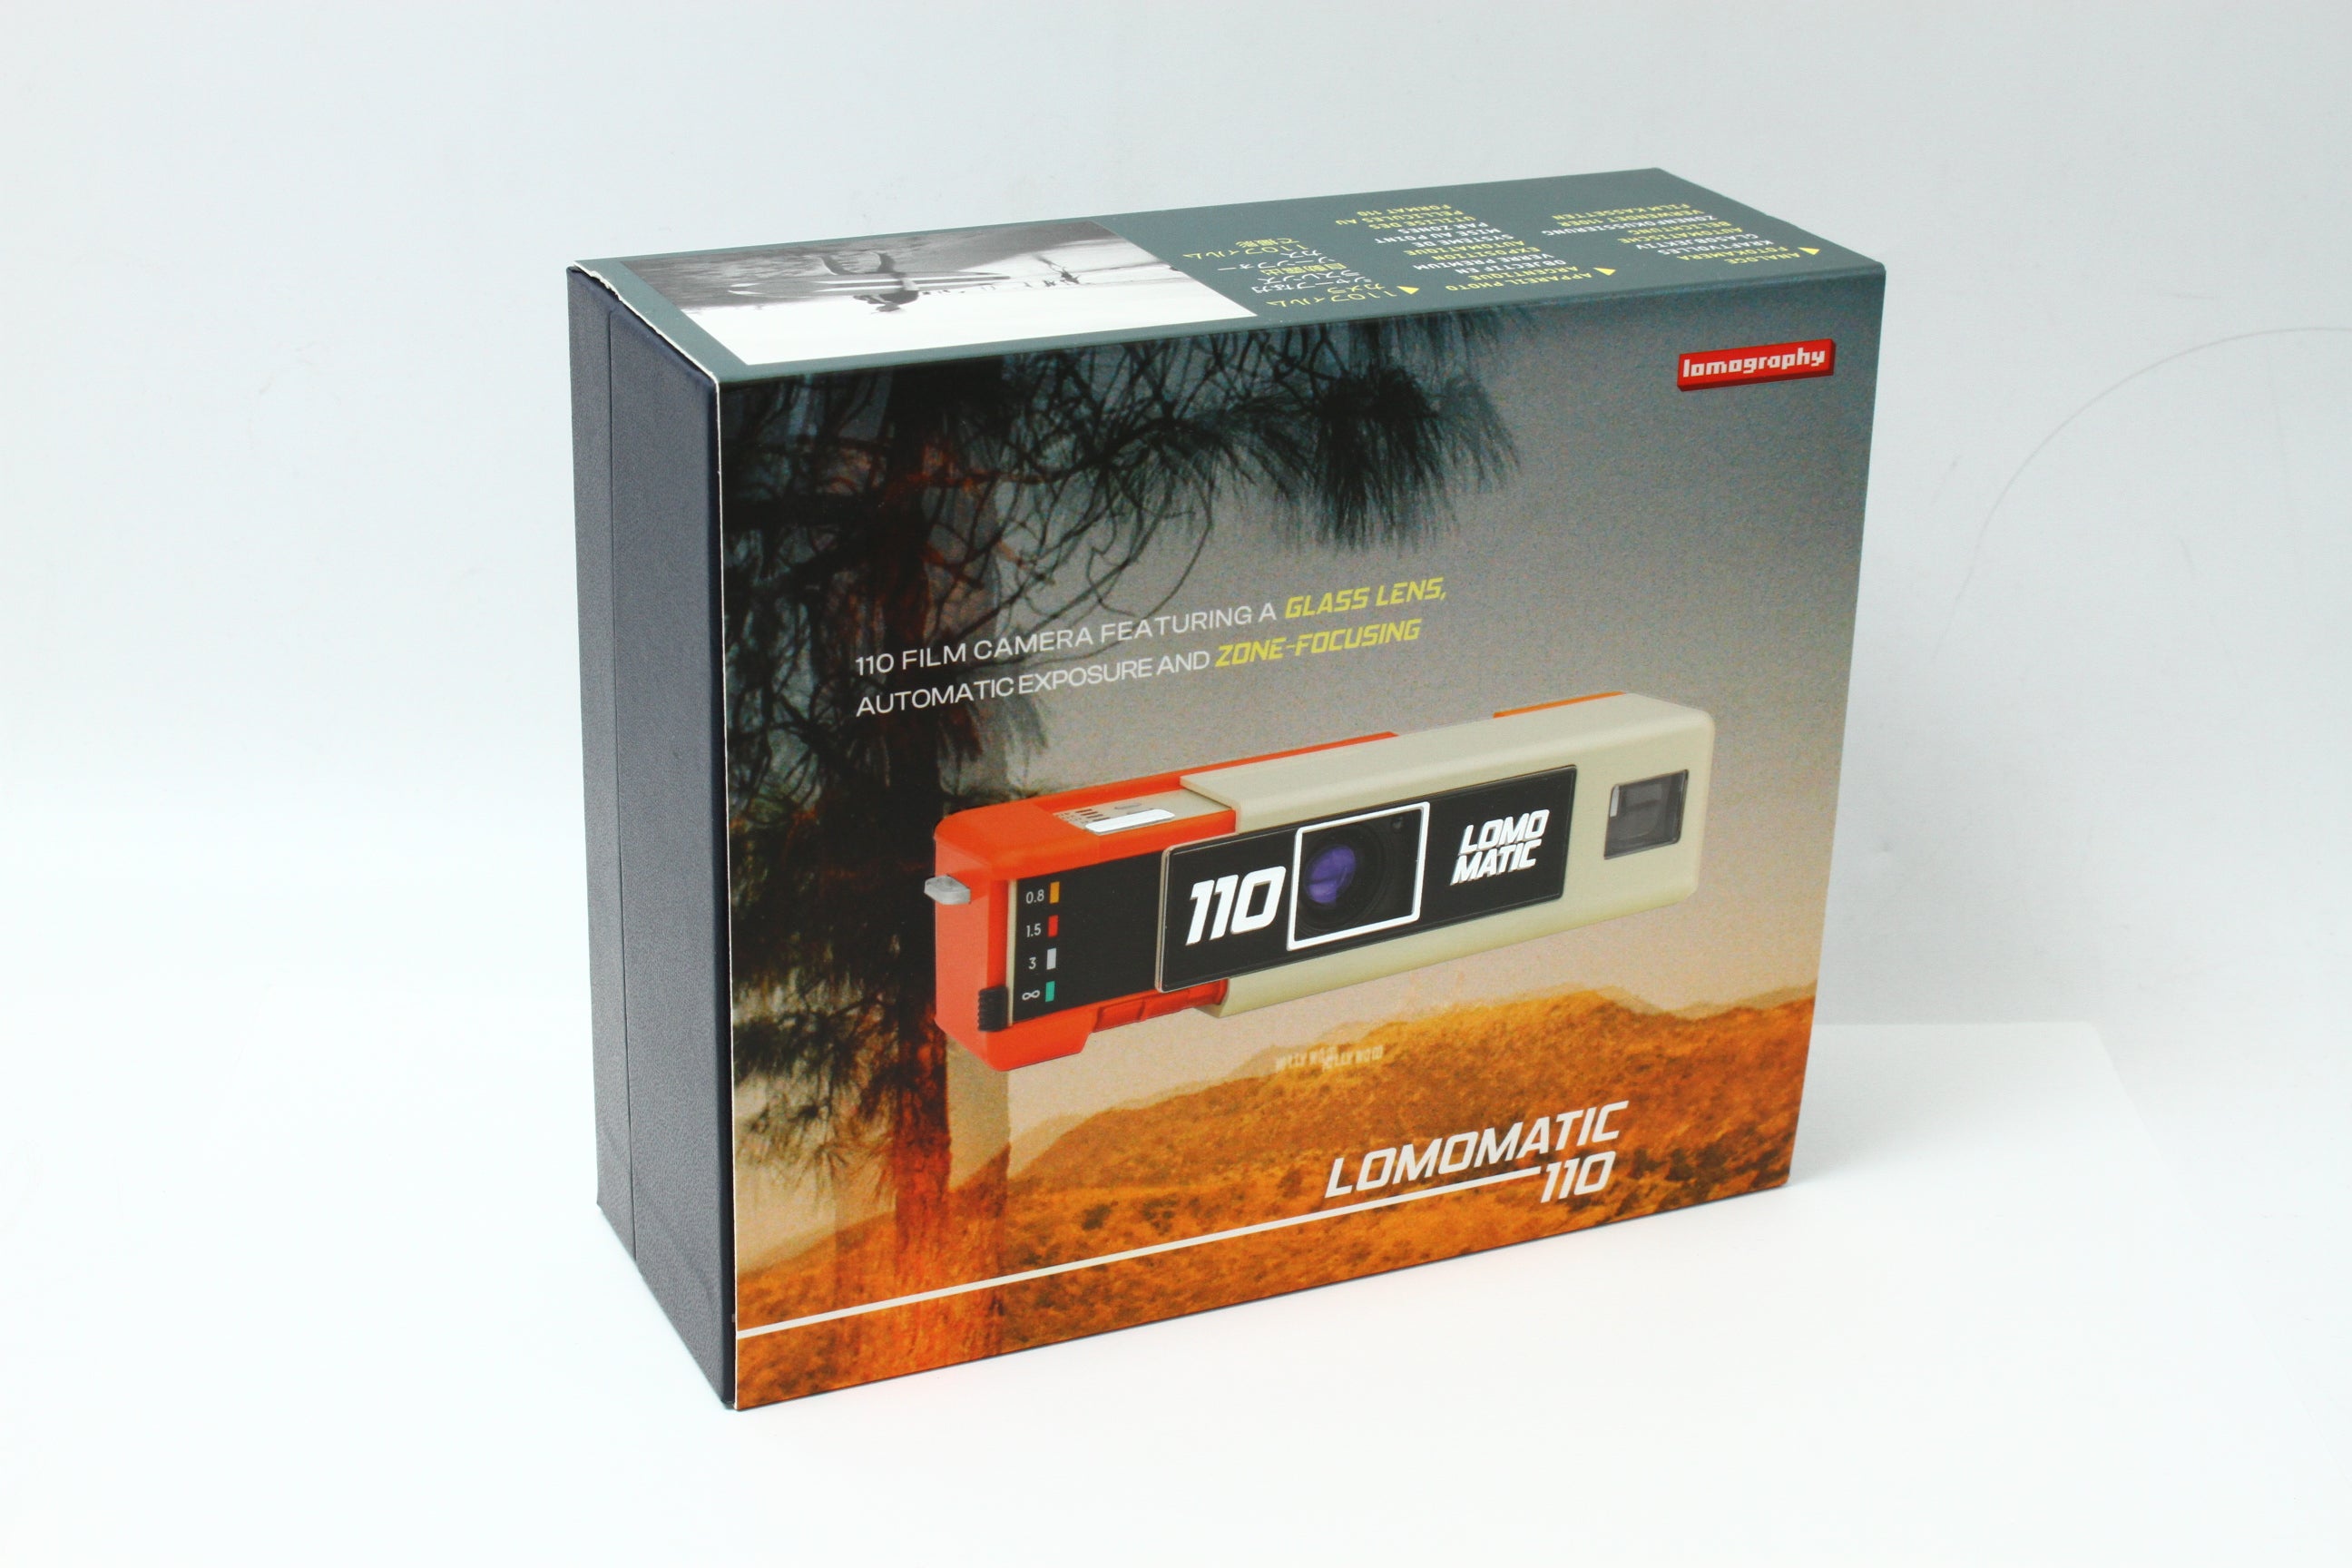 Lomomatic 110 Camera only Golden Gate edition